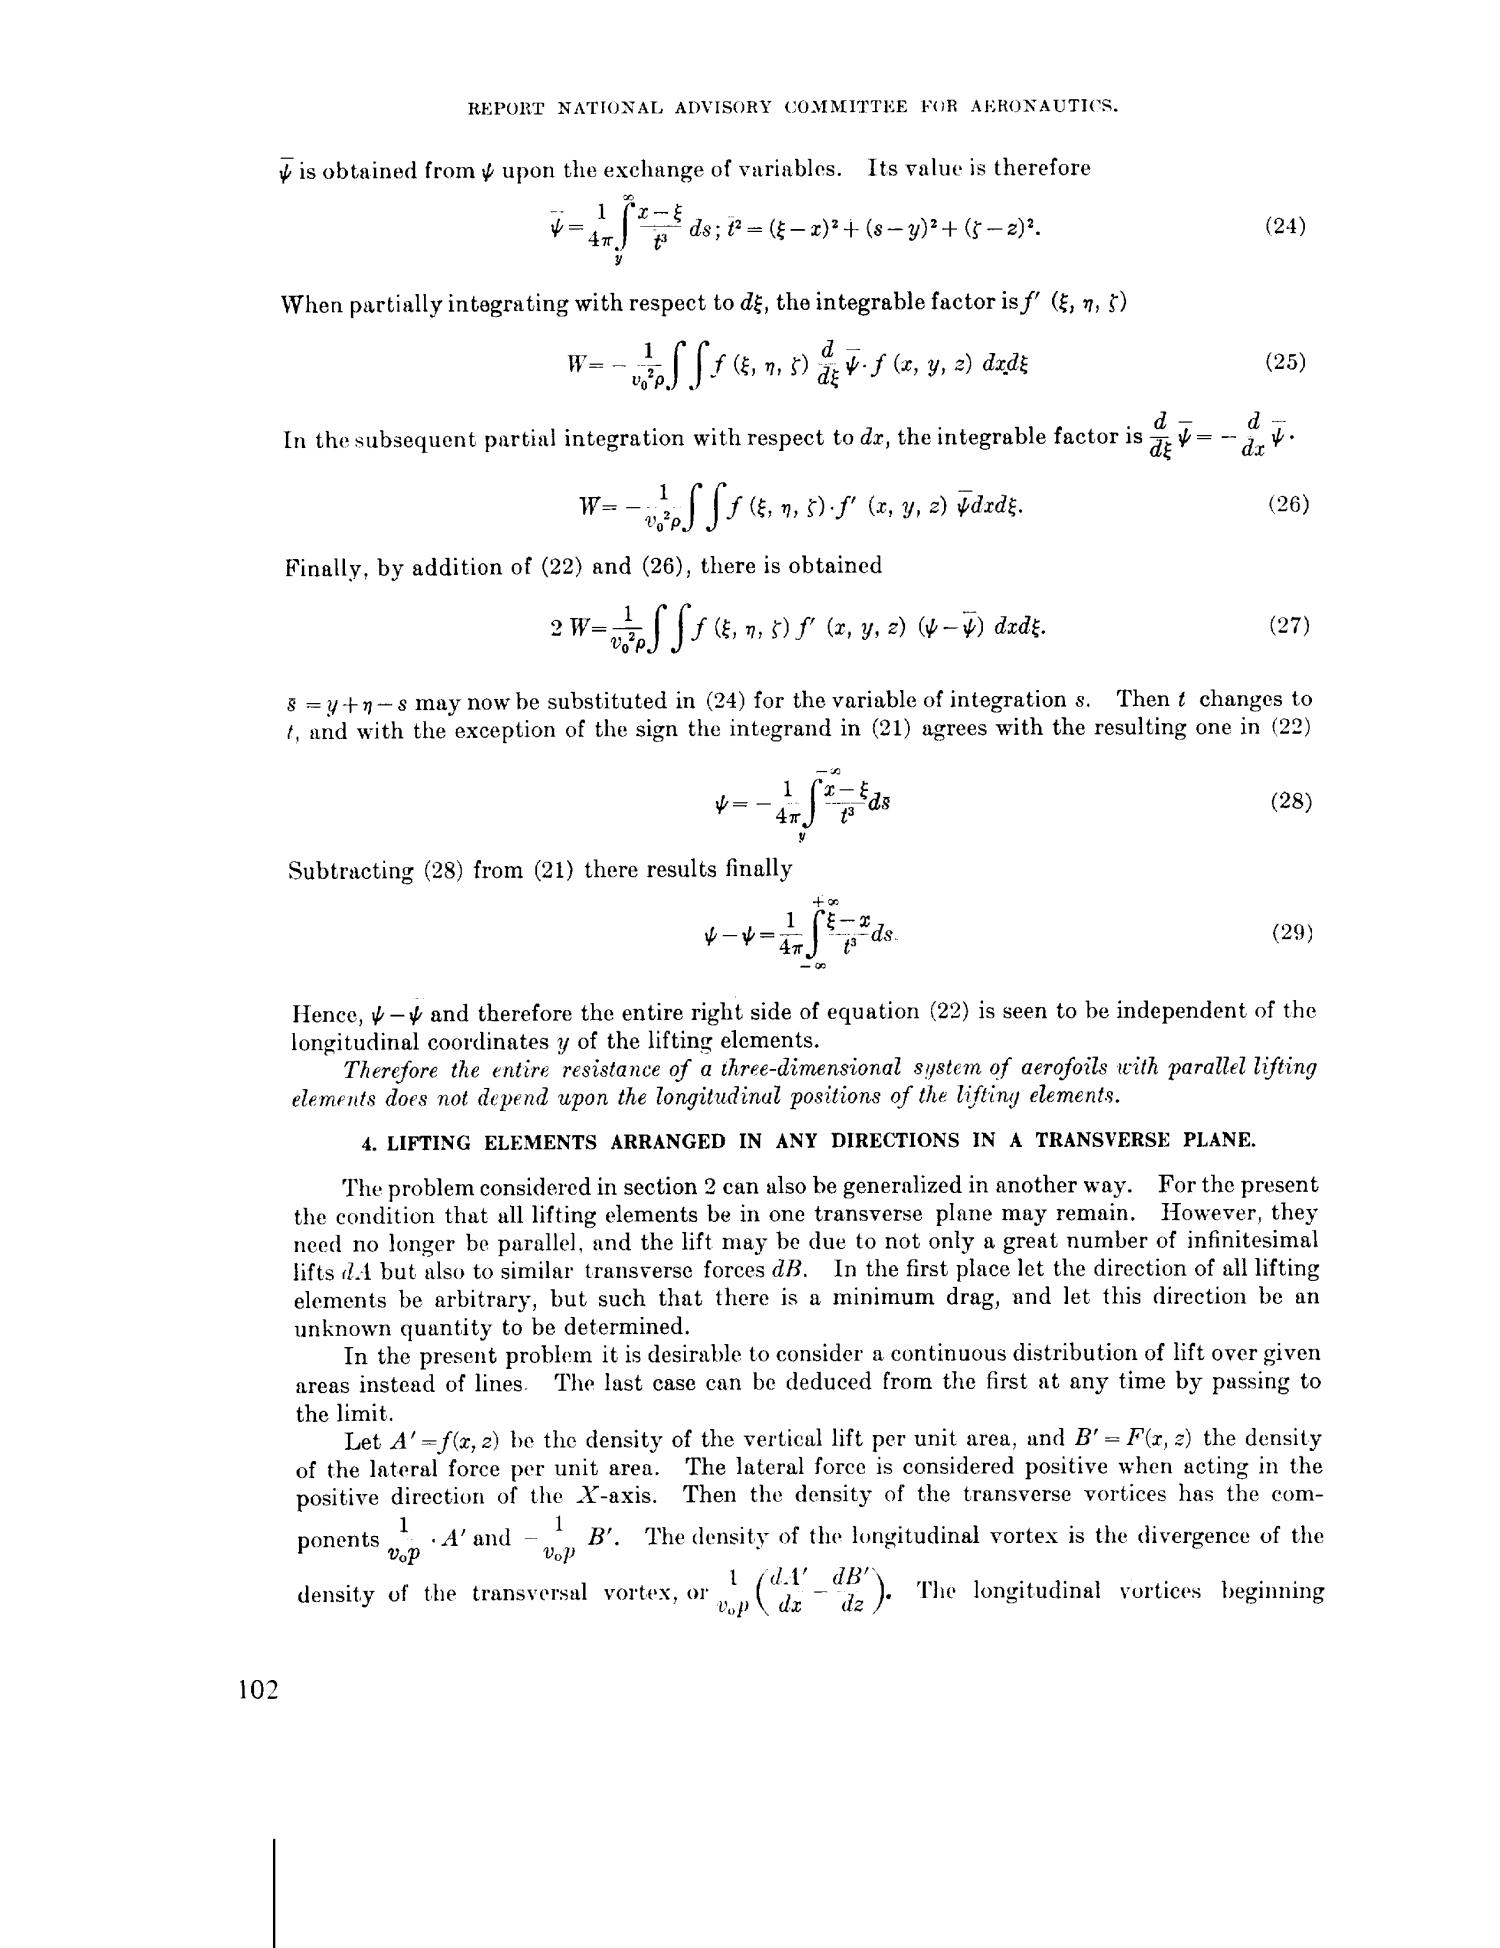 The Minimum Induced Drag of Aerofoils - Page 8 of 16 - UNT Digital Library